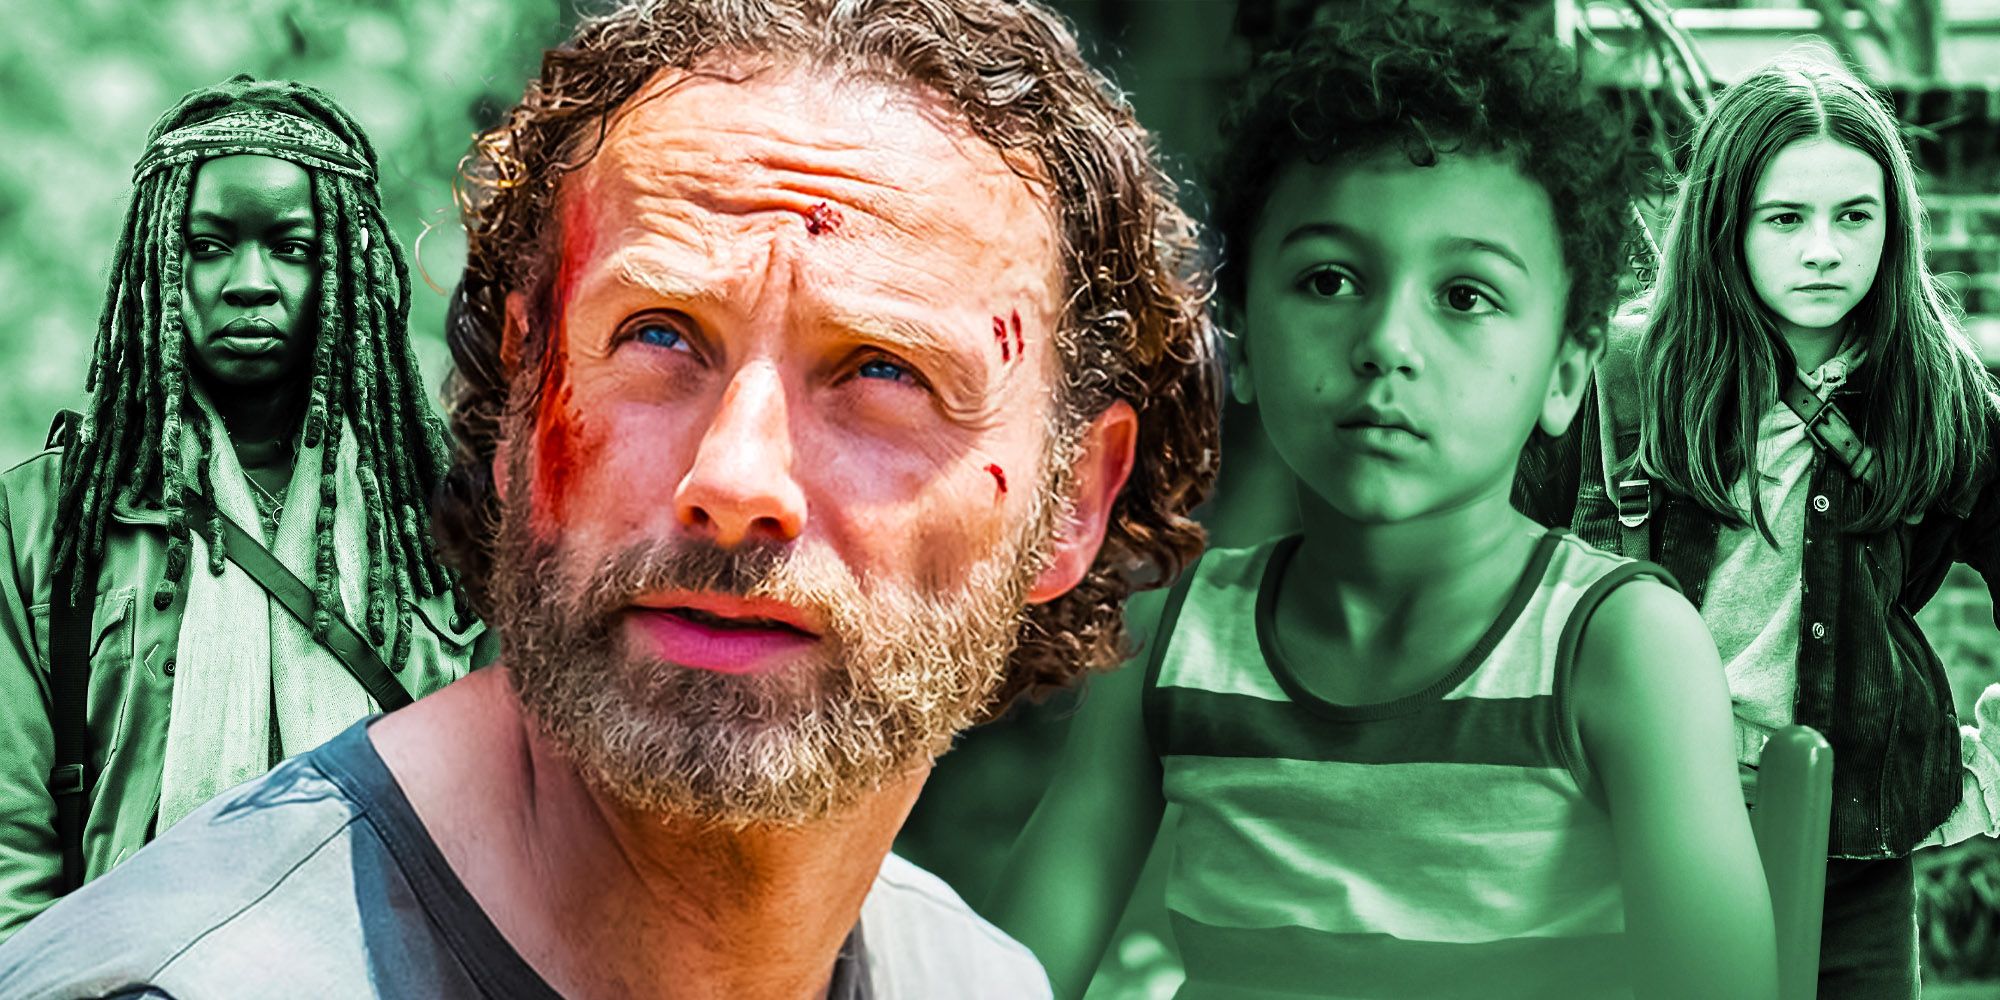 The Ones Who Live Clears Up A Confusing Part Of The Walking Dead’s Timeline